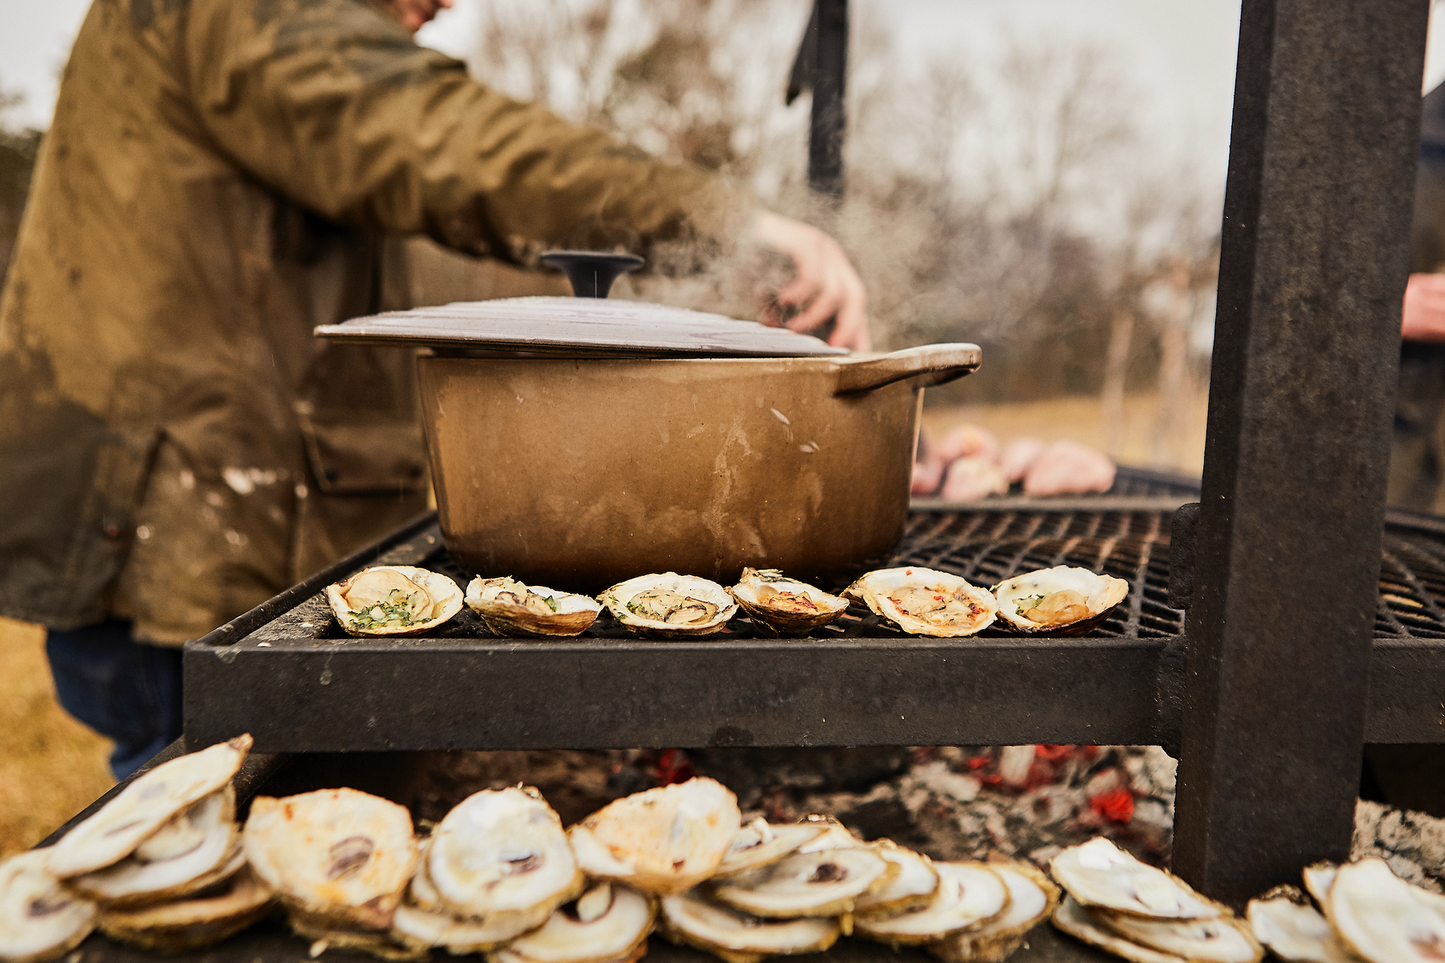 While we don't recommend smoking, we strongly recommend smoked grilled oysters following this tried and true oyster recipe.